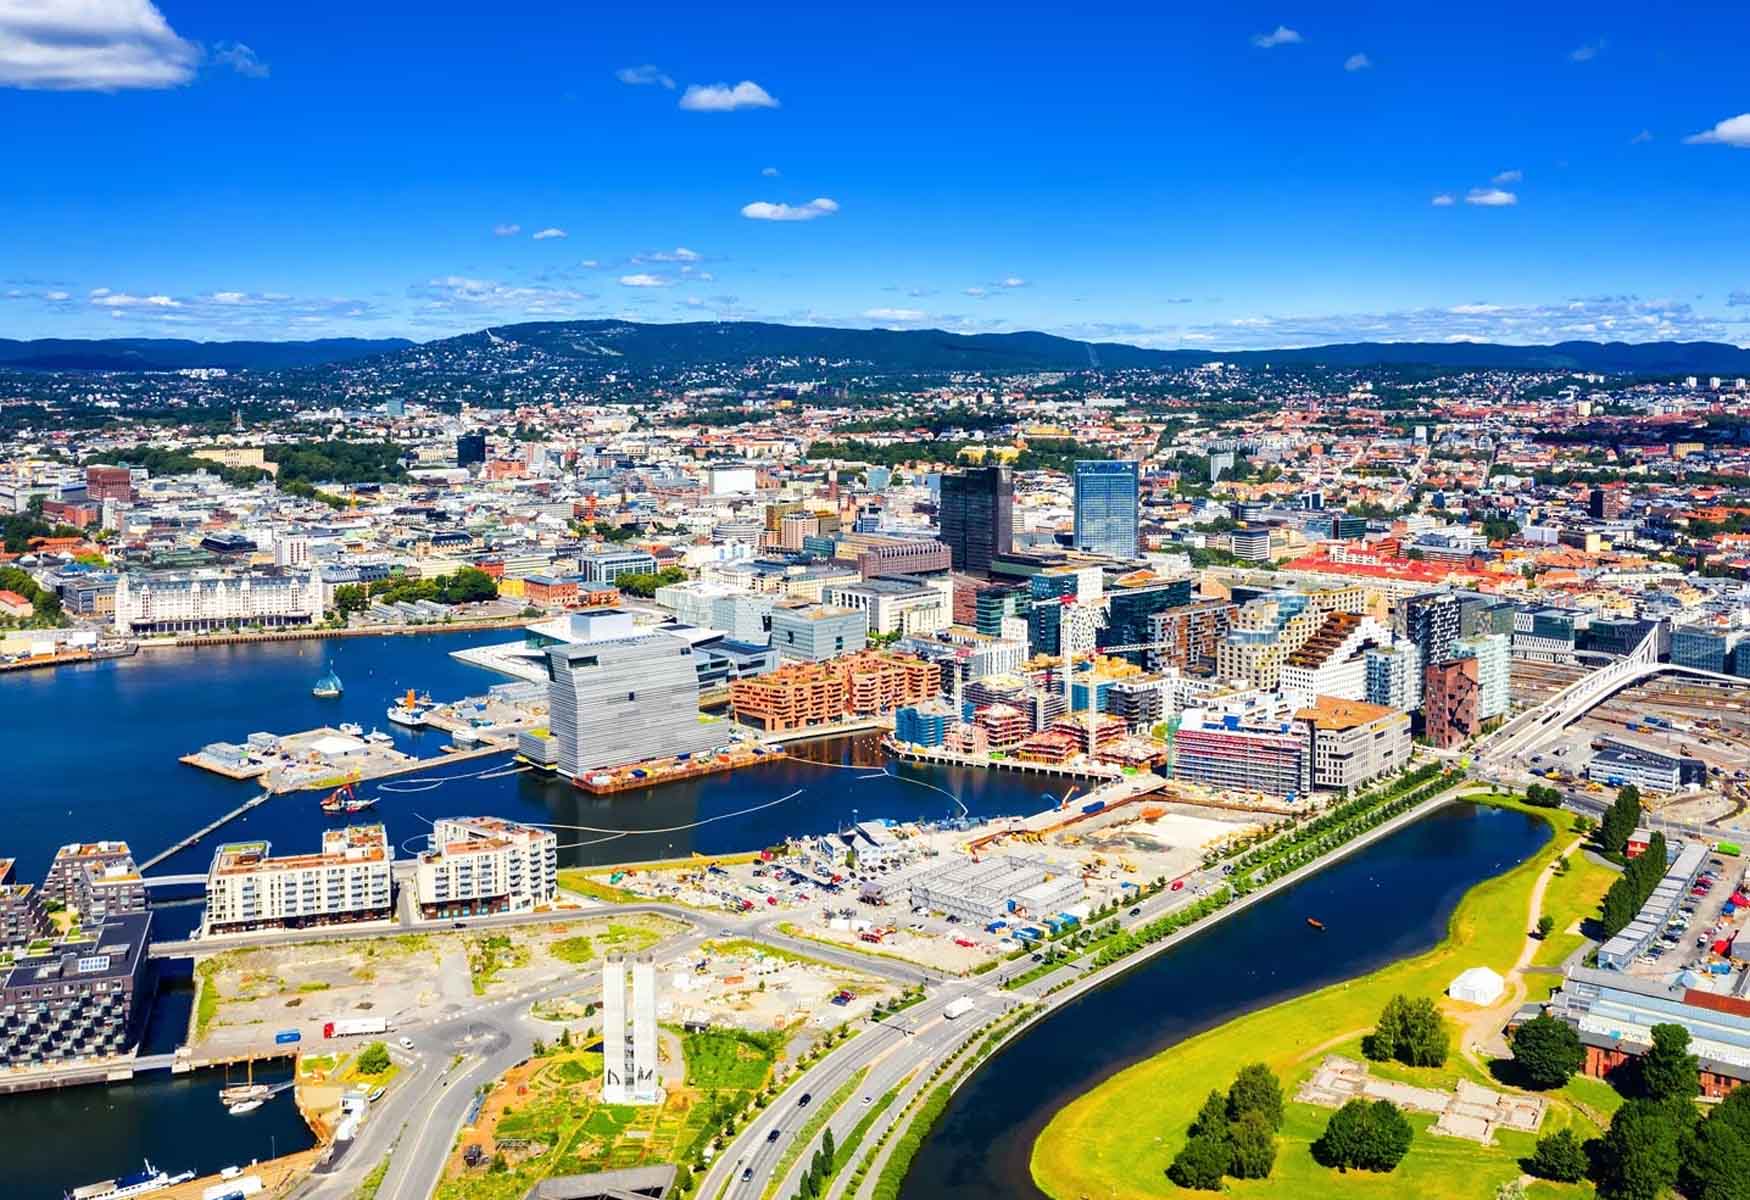 Where To Stay In Oslo: The BEST Areas